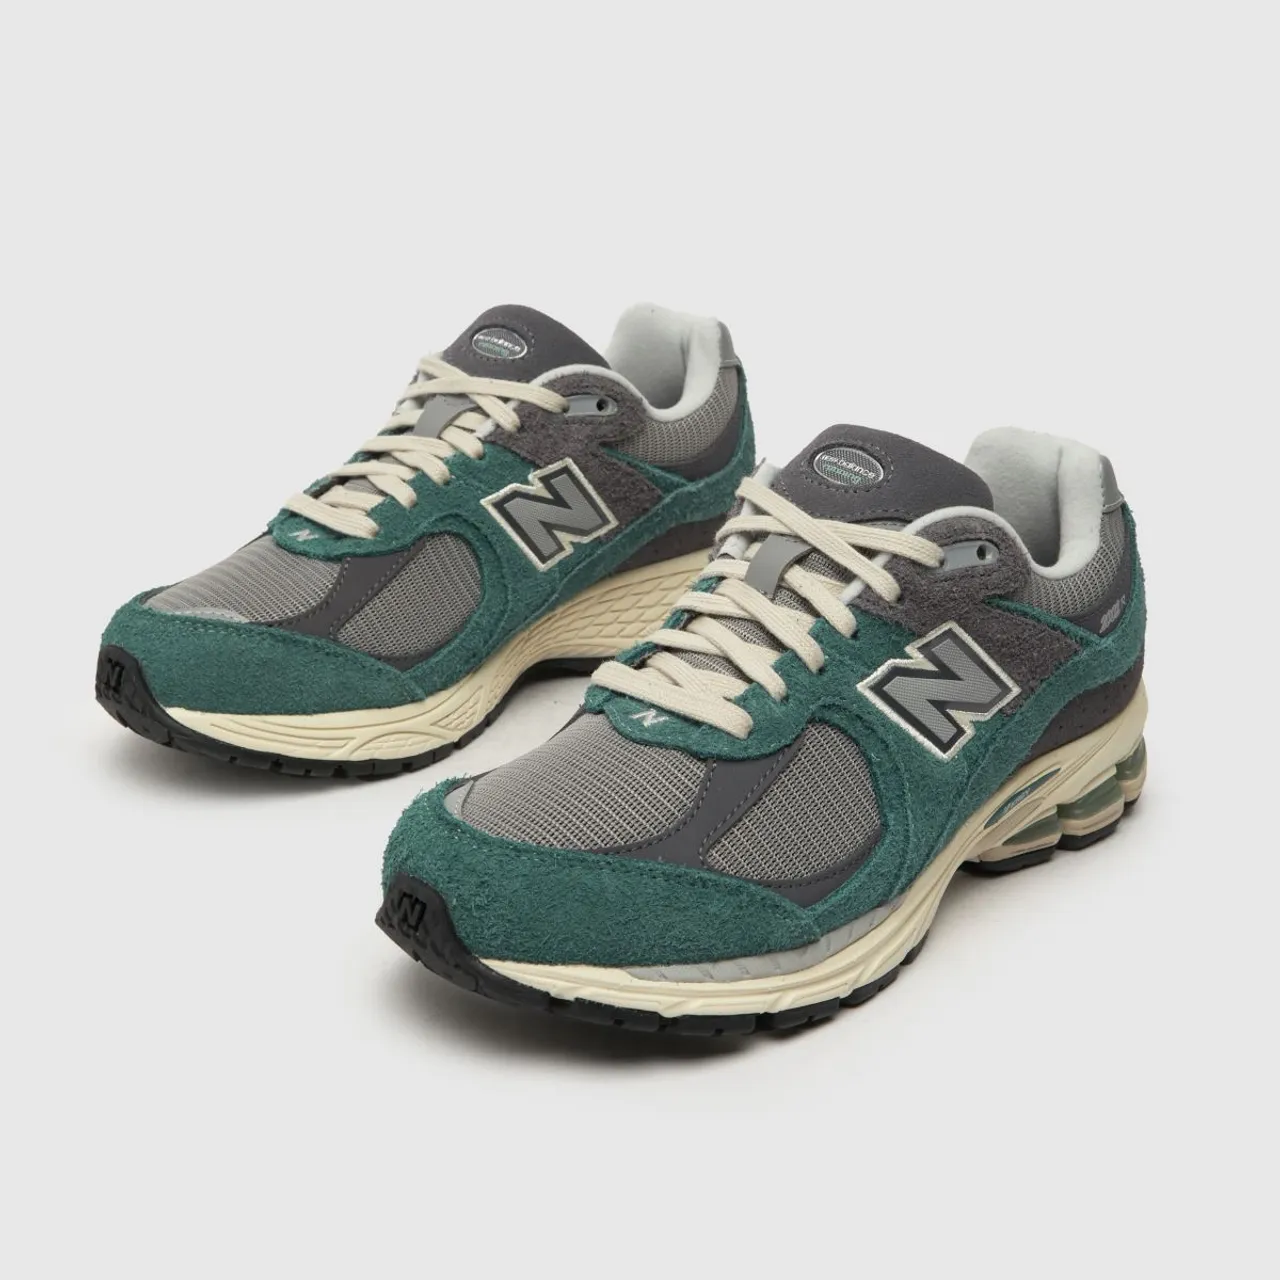 New Balance 2002r Trainers in Turquoise